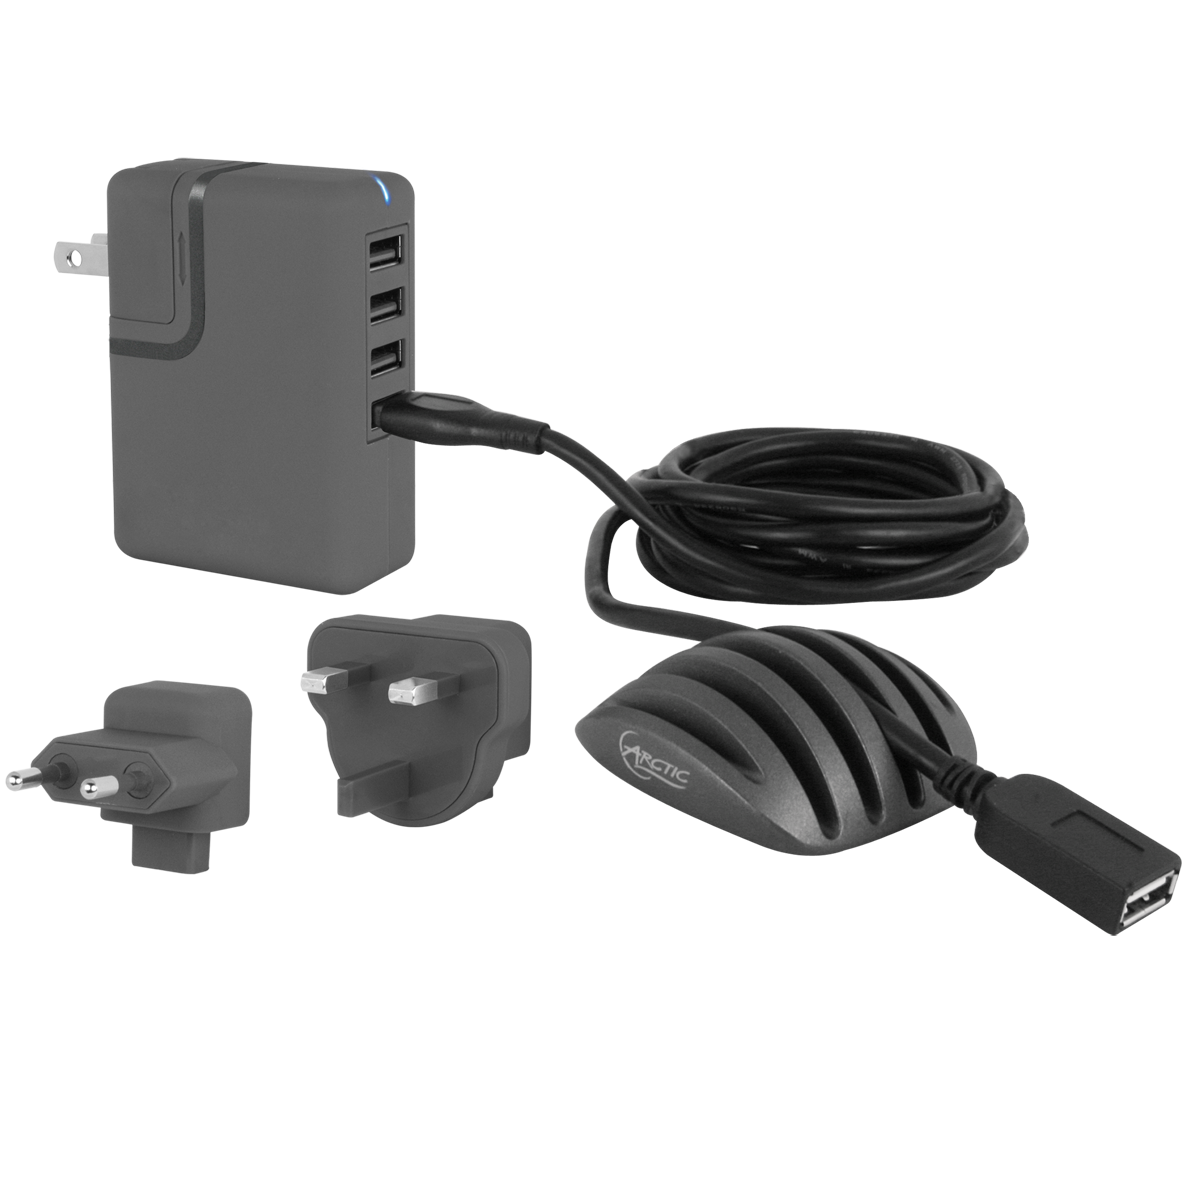 electricity clipart computer charger